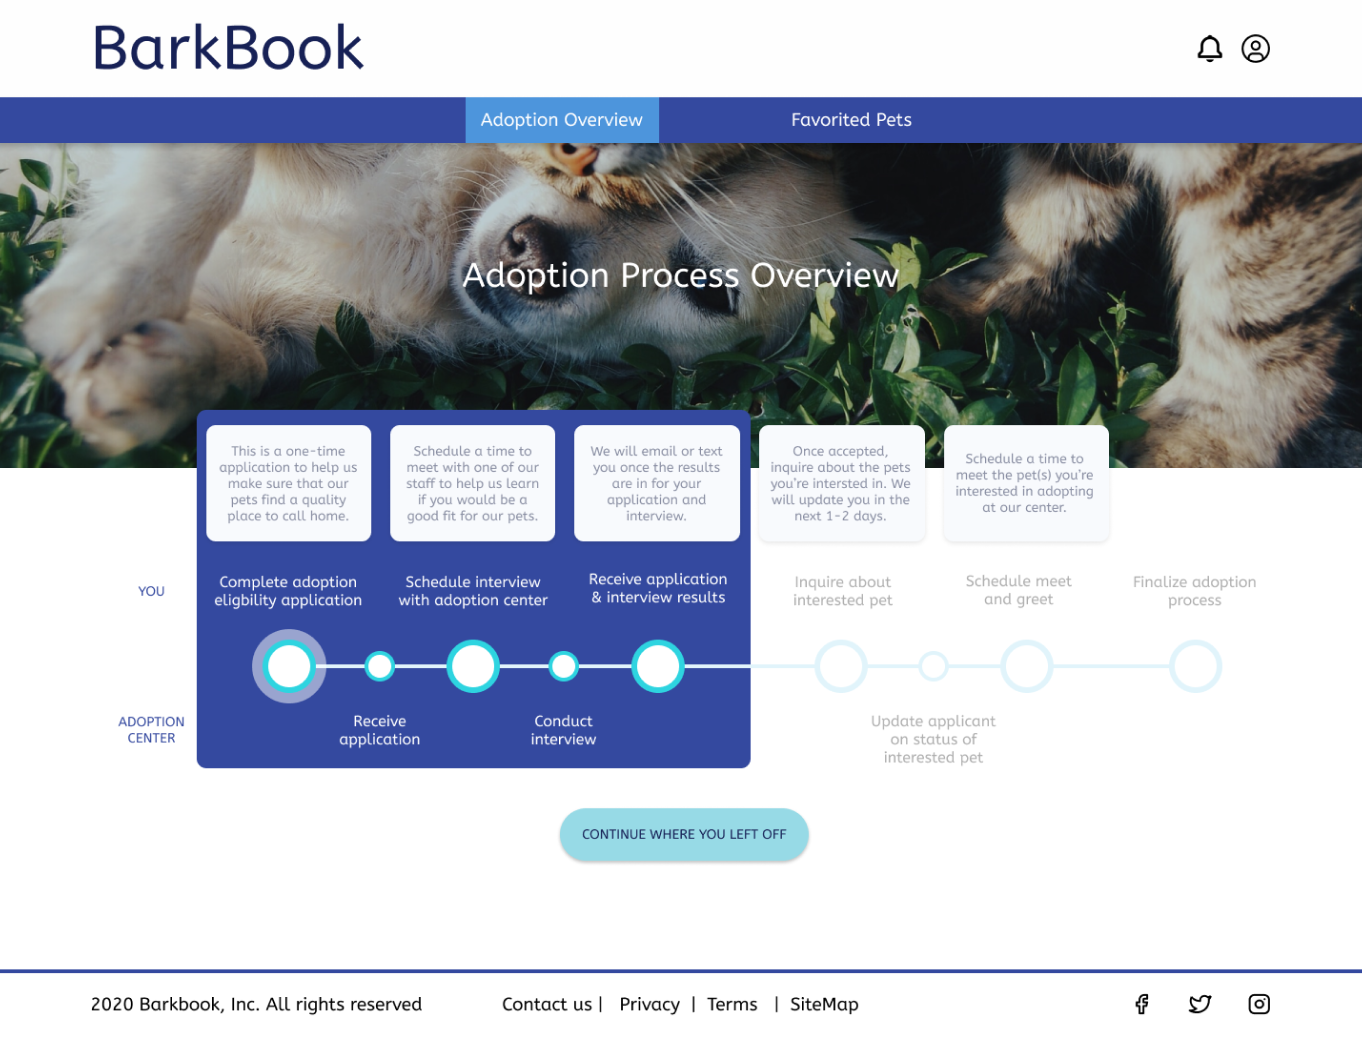 On the left there is the desktop version of BarkBook. On the top left there is the logo for barkbook and on the top right there is a bell and person icon. On the navabr below there are to categories: adoption overview and favorited pets. The timeline is the same as mobile one but it is horizontal and has the descriptions of each step above it.